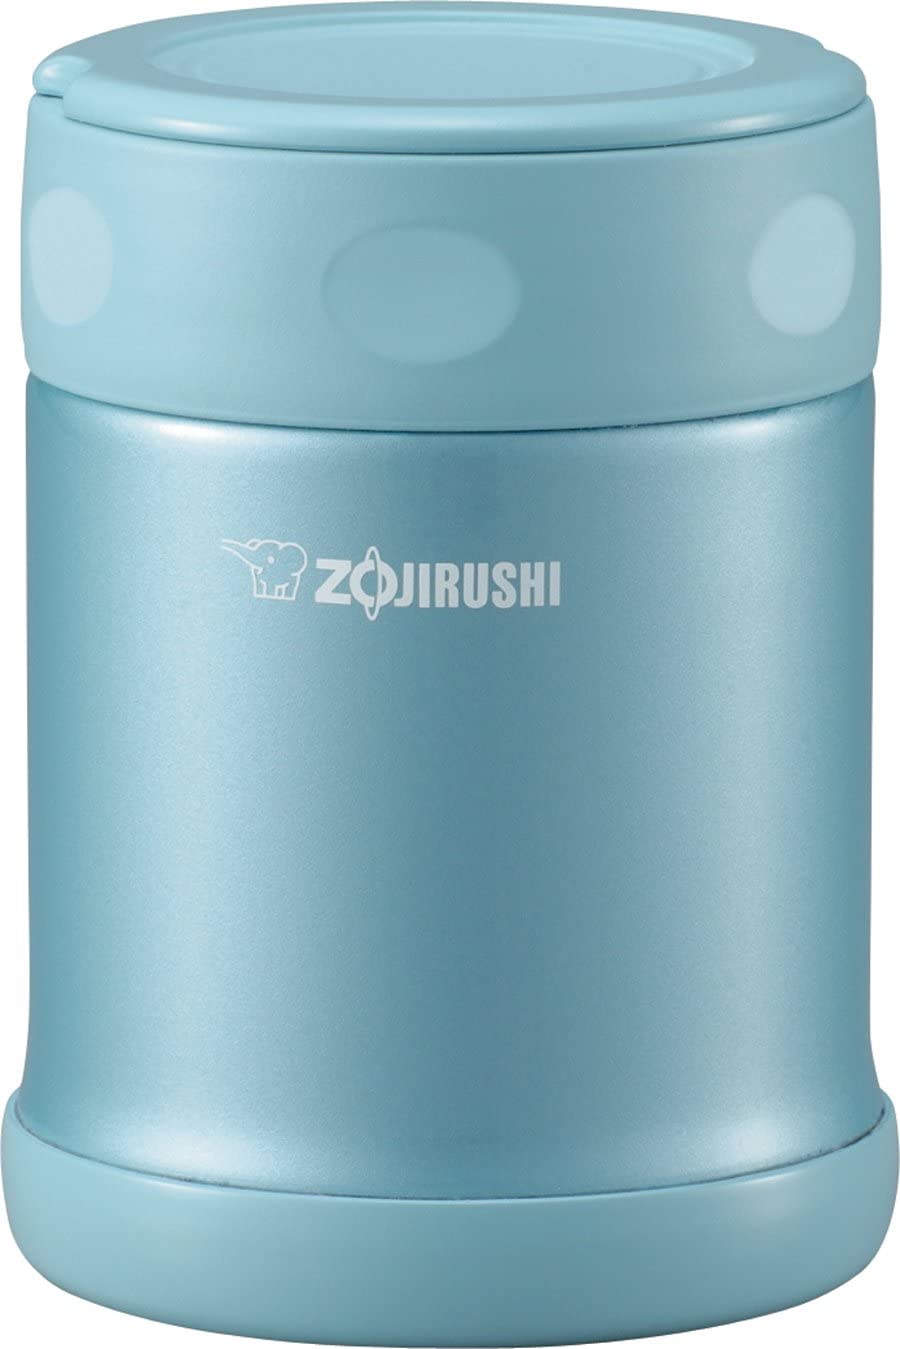 Zojirushi Ms. Bento Stainless-Steel Vacuum Lunch Jar, 28.5-Ounce, Stainless